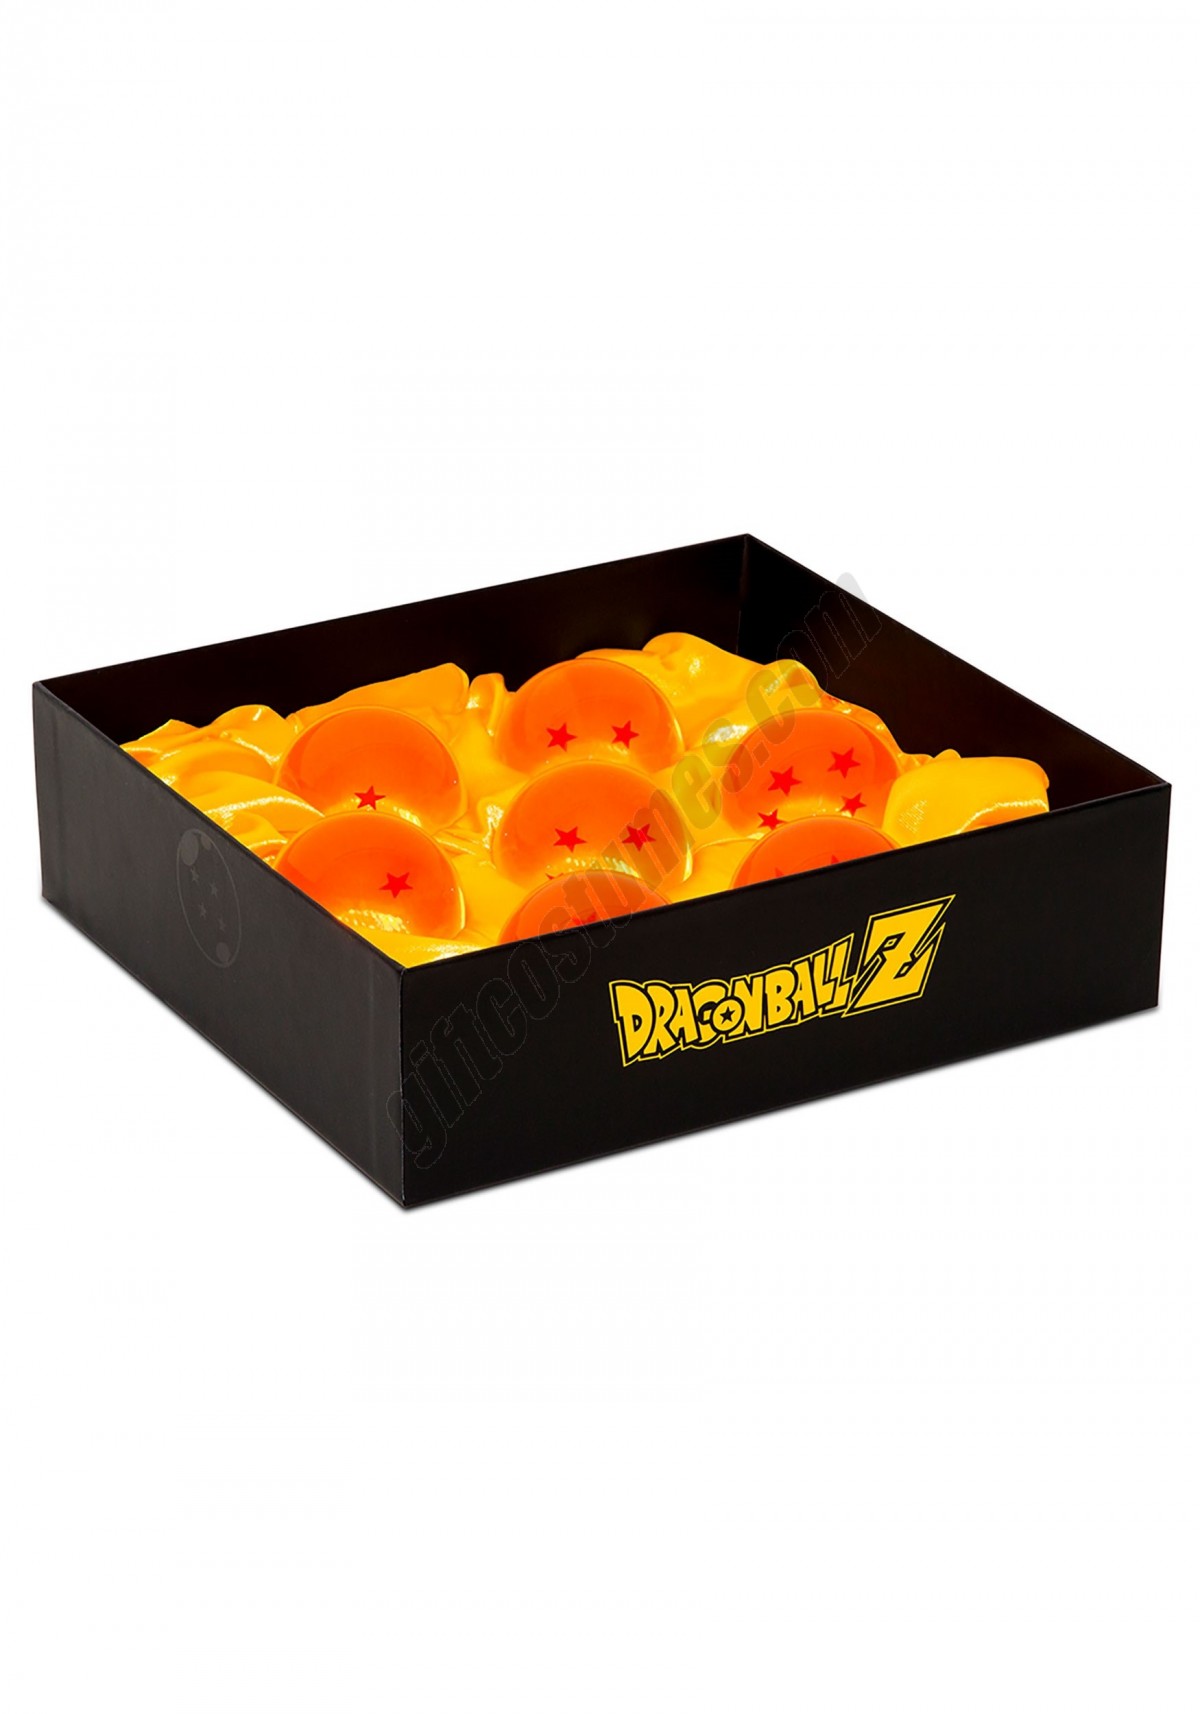 Dragon Ball Z Crystal Ball Collectors Set Promotions - -1